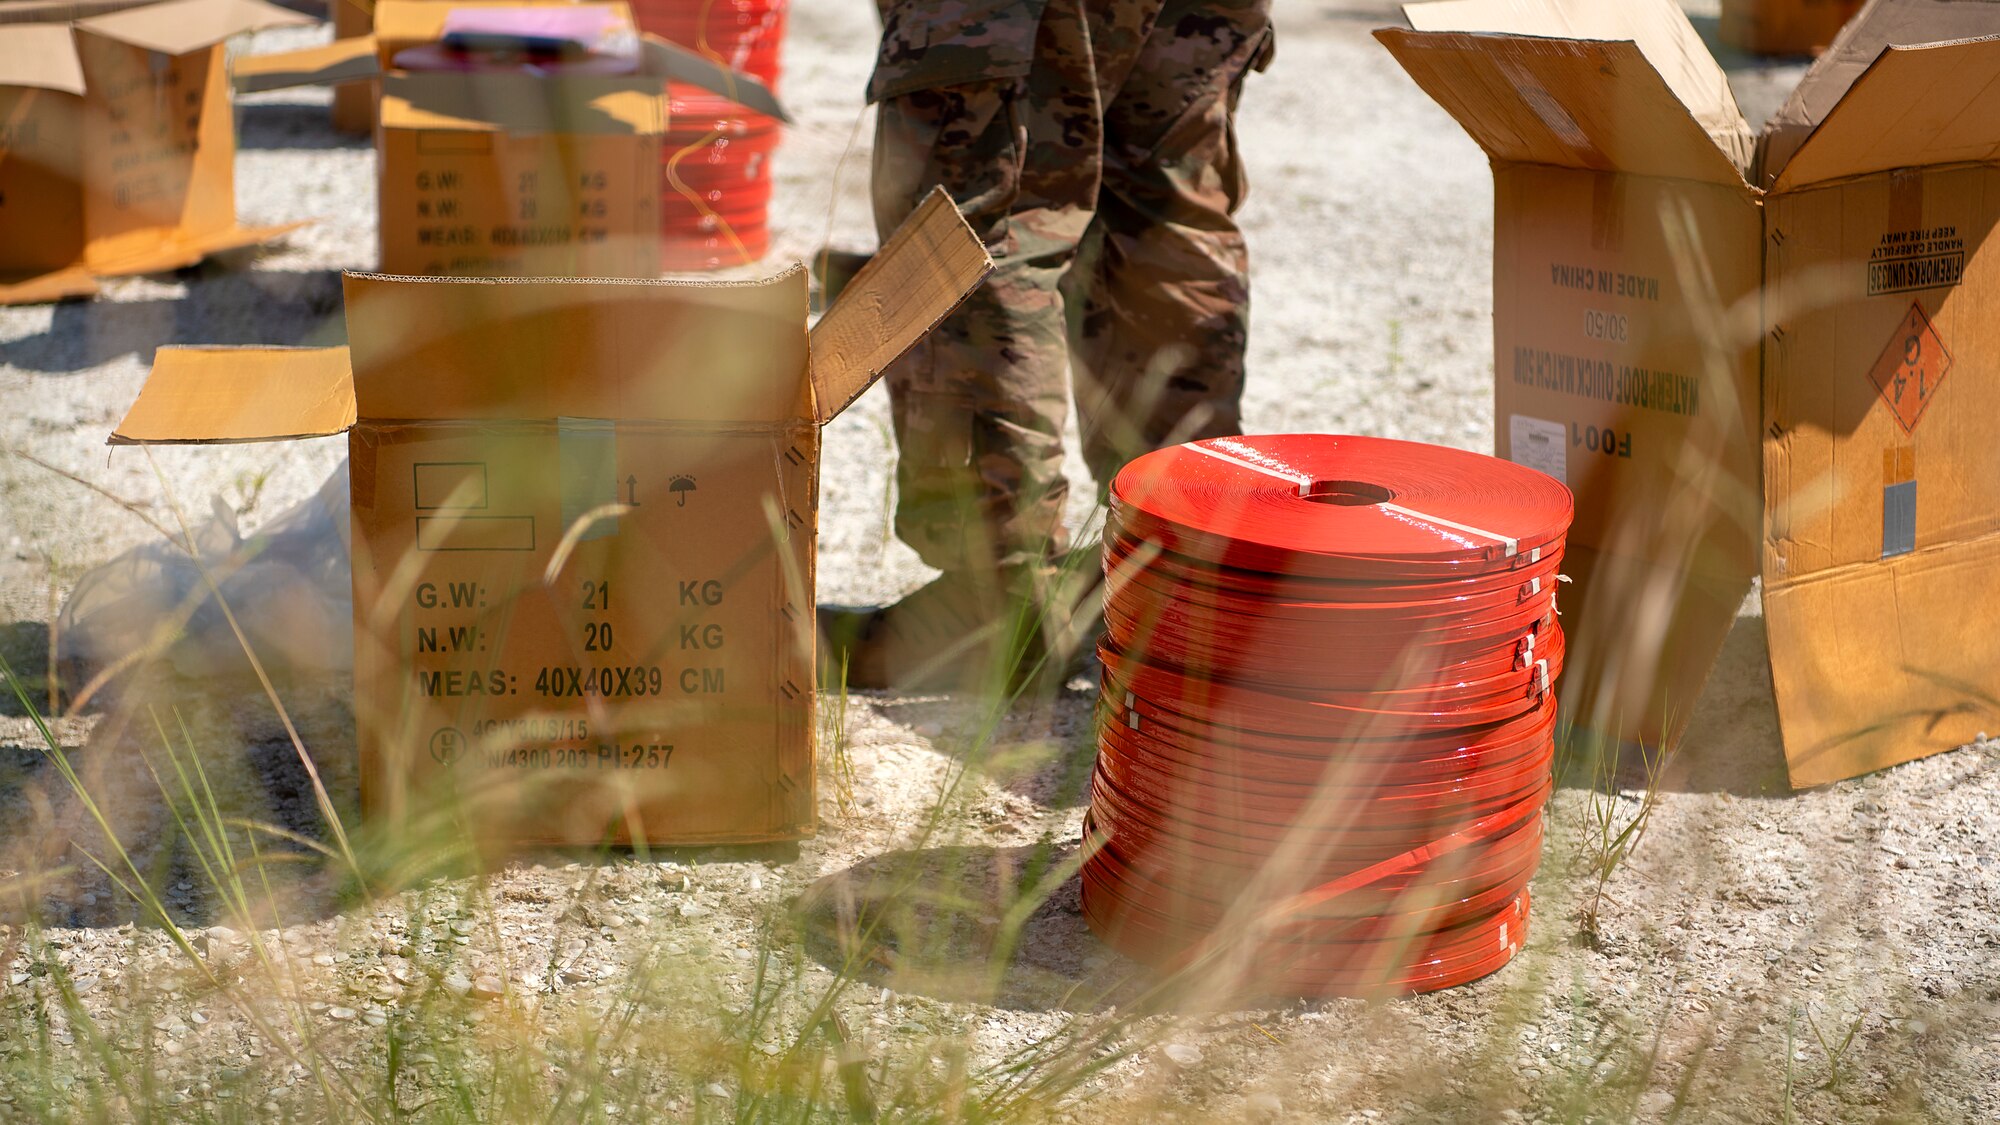 Unpacked explosives are placed at the Avon Park Air Force Range, Fla., prior to a controlled detonation Sept. 9, 2019. The Bureau of Alcohol, Tobacco, Firearms and Explosives seized over 7,000 pounds of explosives from a prior convicted felon in the largest explosives seizure in Florida history.